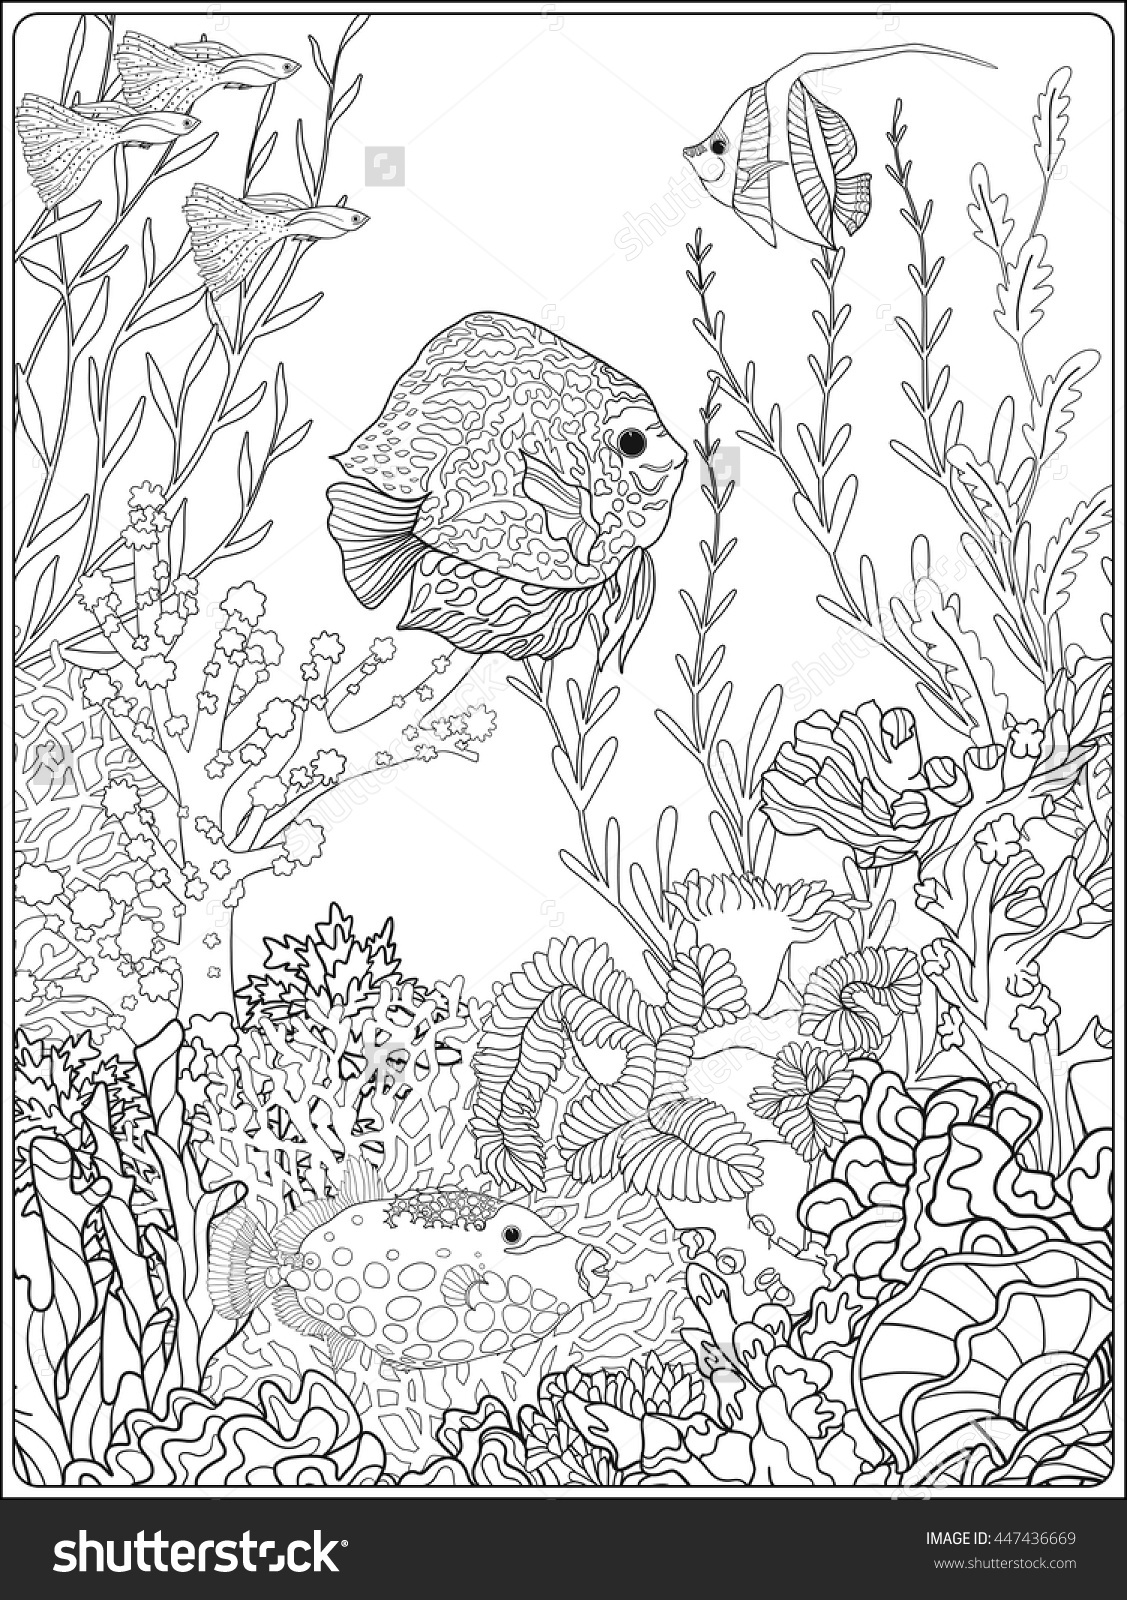 Sea World Coloring Pages at GetColorings.com | Free ...